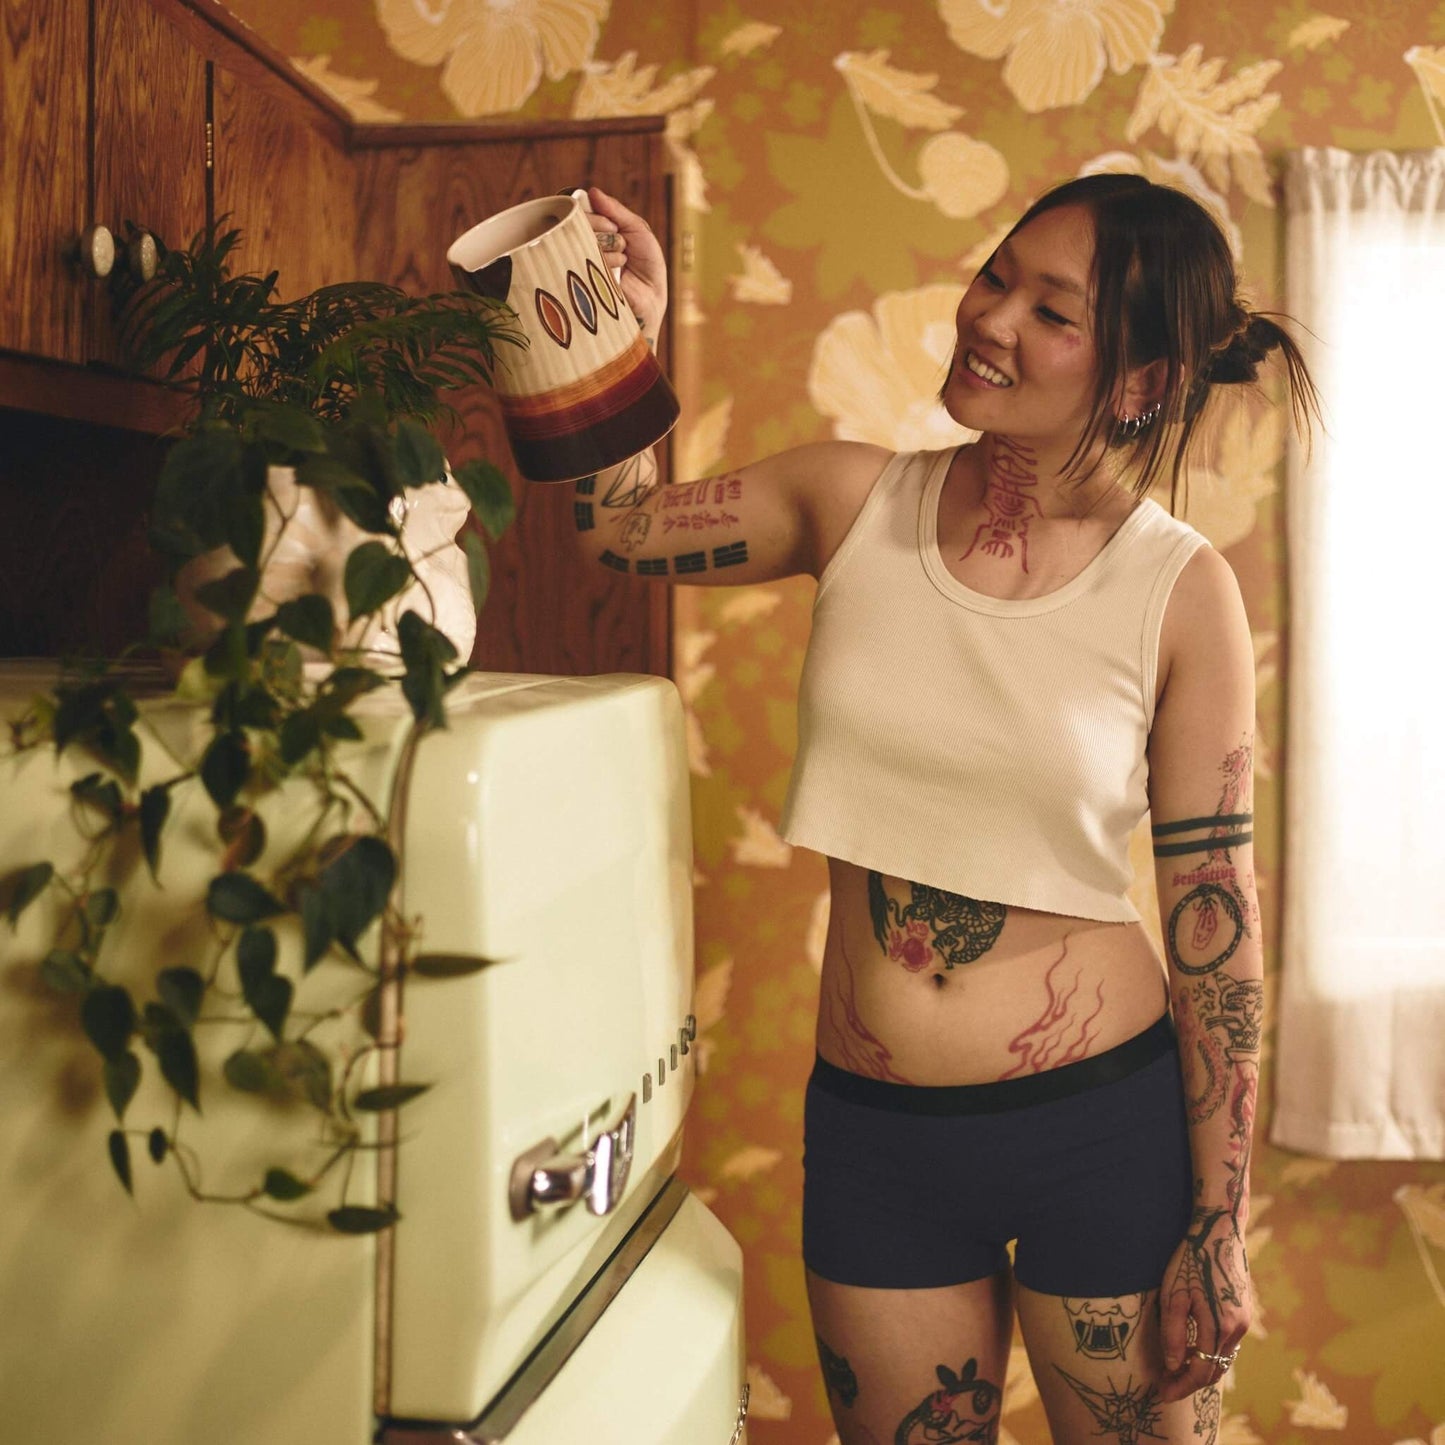 A woman with tattoos standing in front of a refrigerator wearing Better Clothing Company's Better Cotton Boyshort underwear.